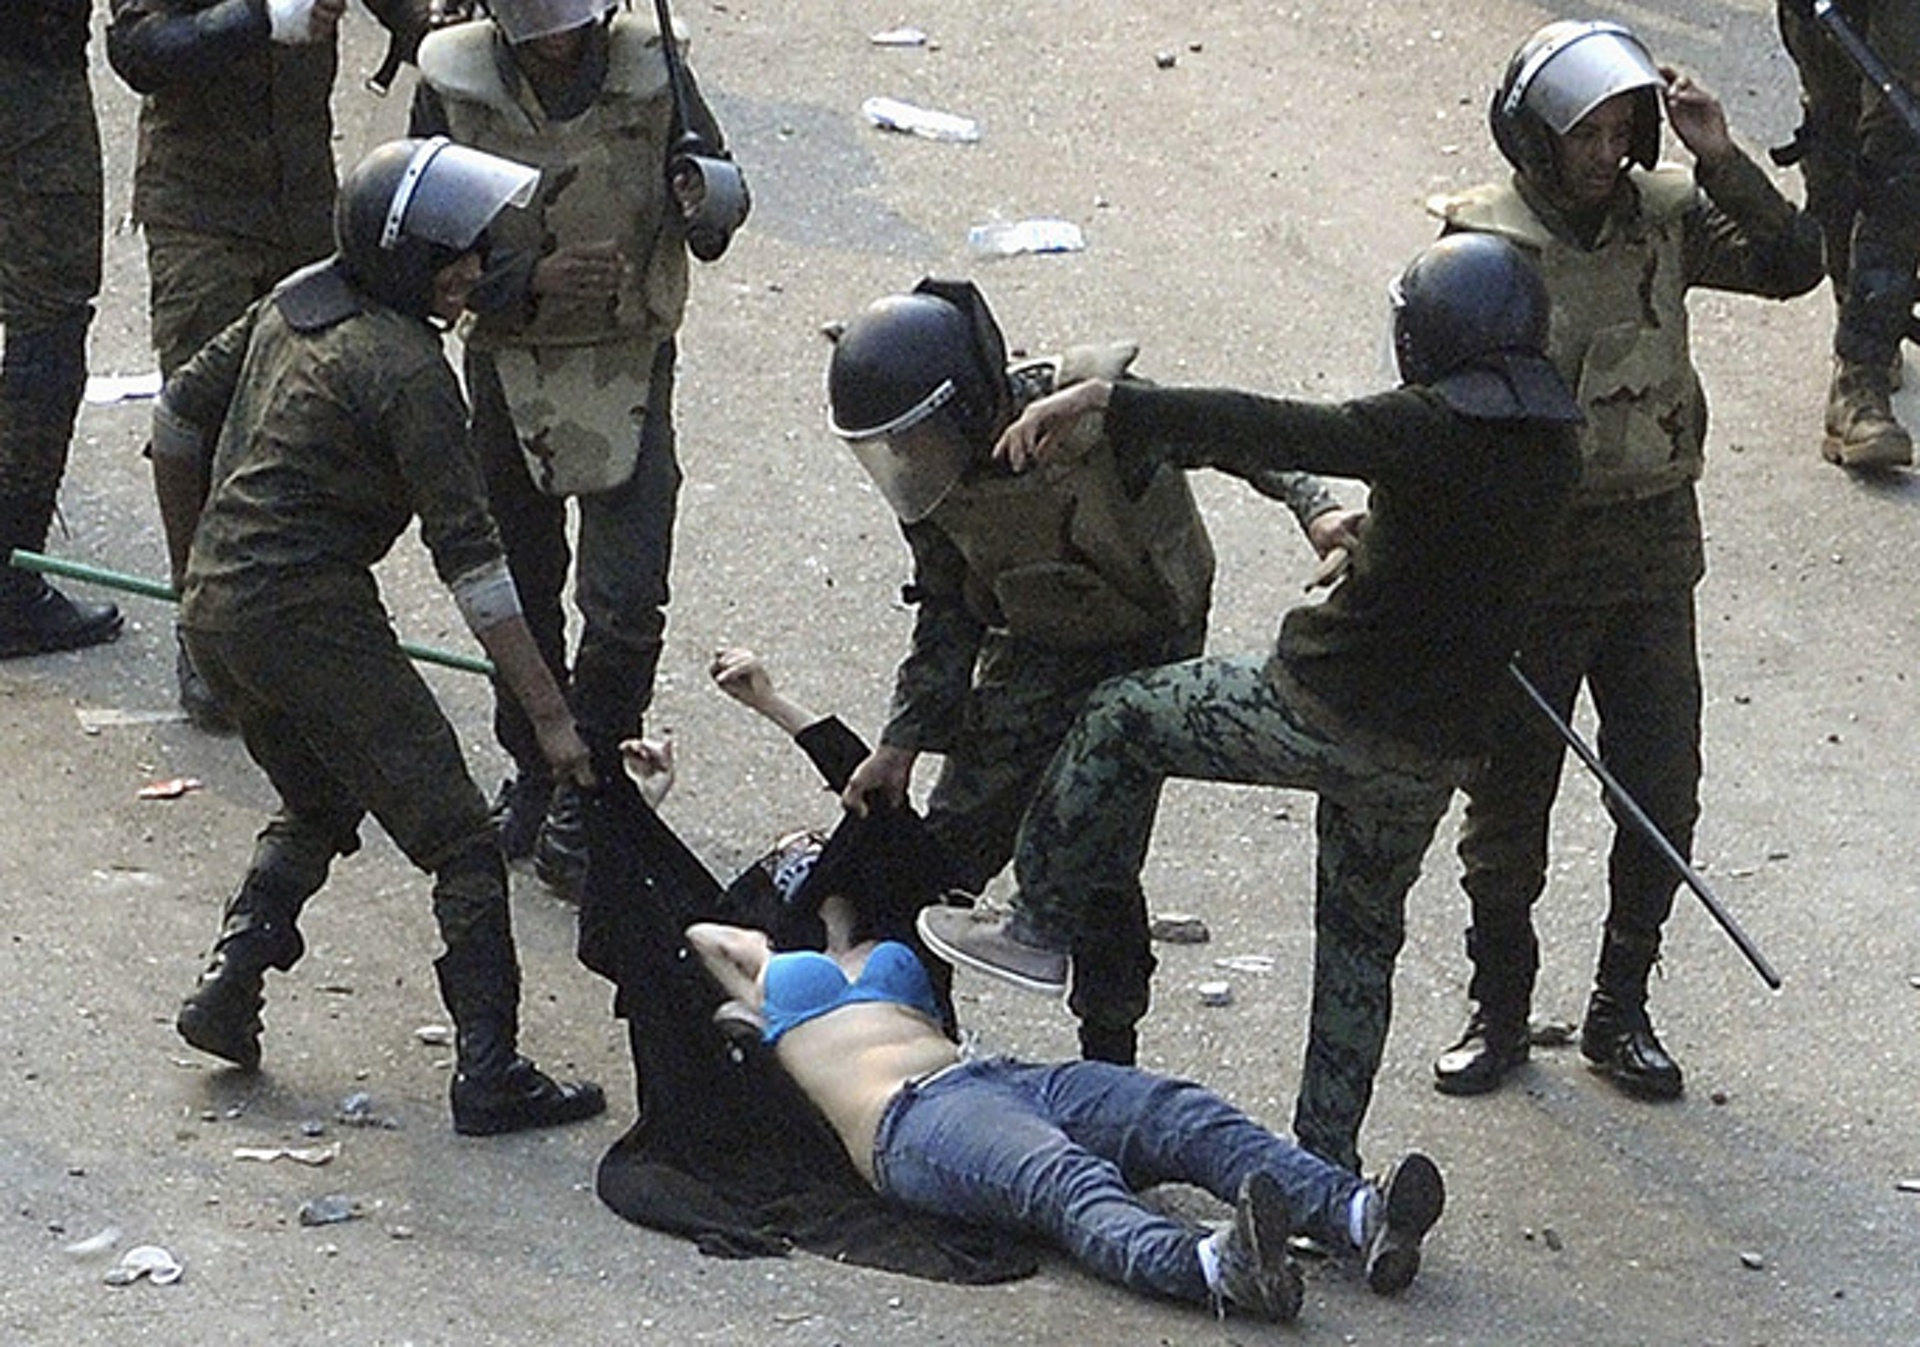 Egyptian soldiers beat a female protester during clashes at Tahrir Square, pulling up her abaya and dragging her through the street. Photo: Reuters